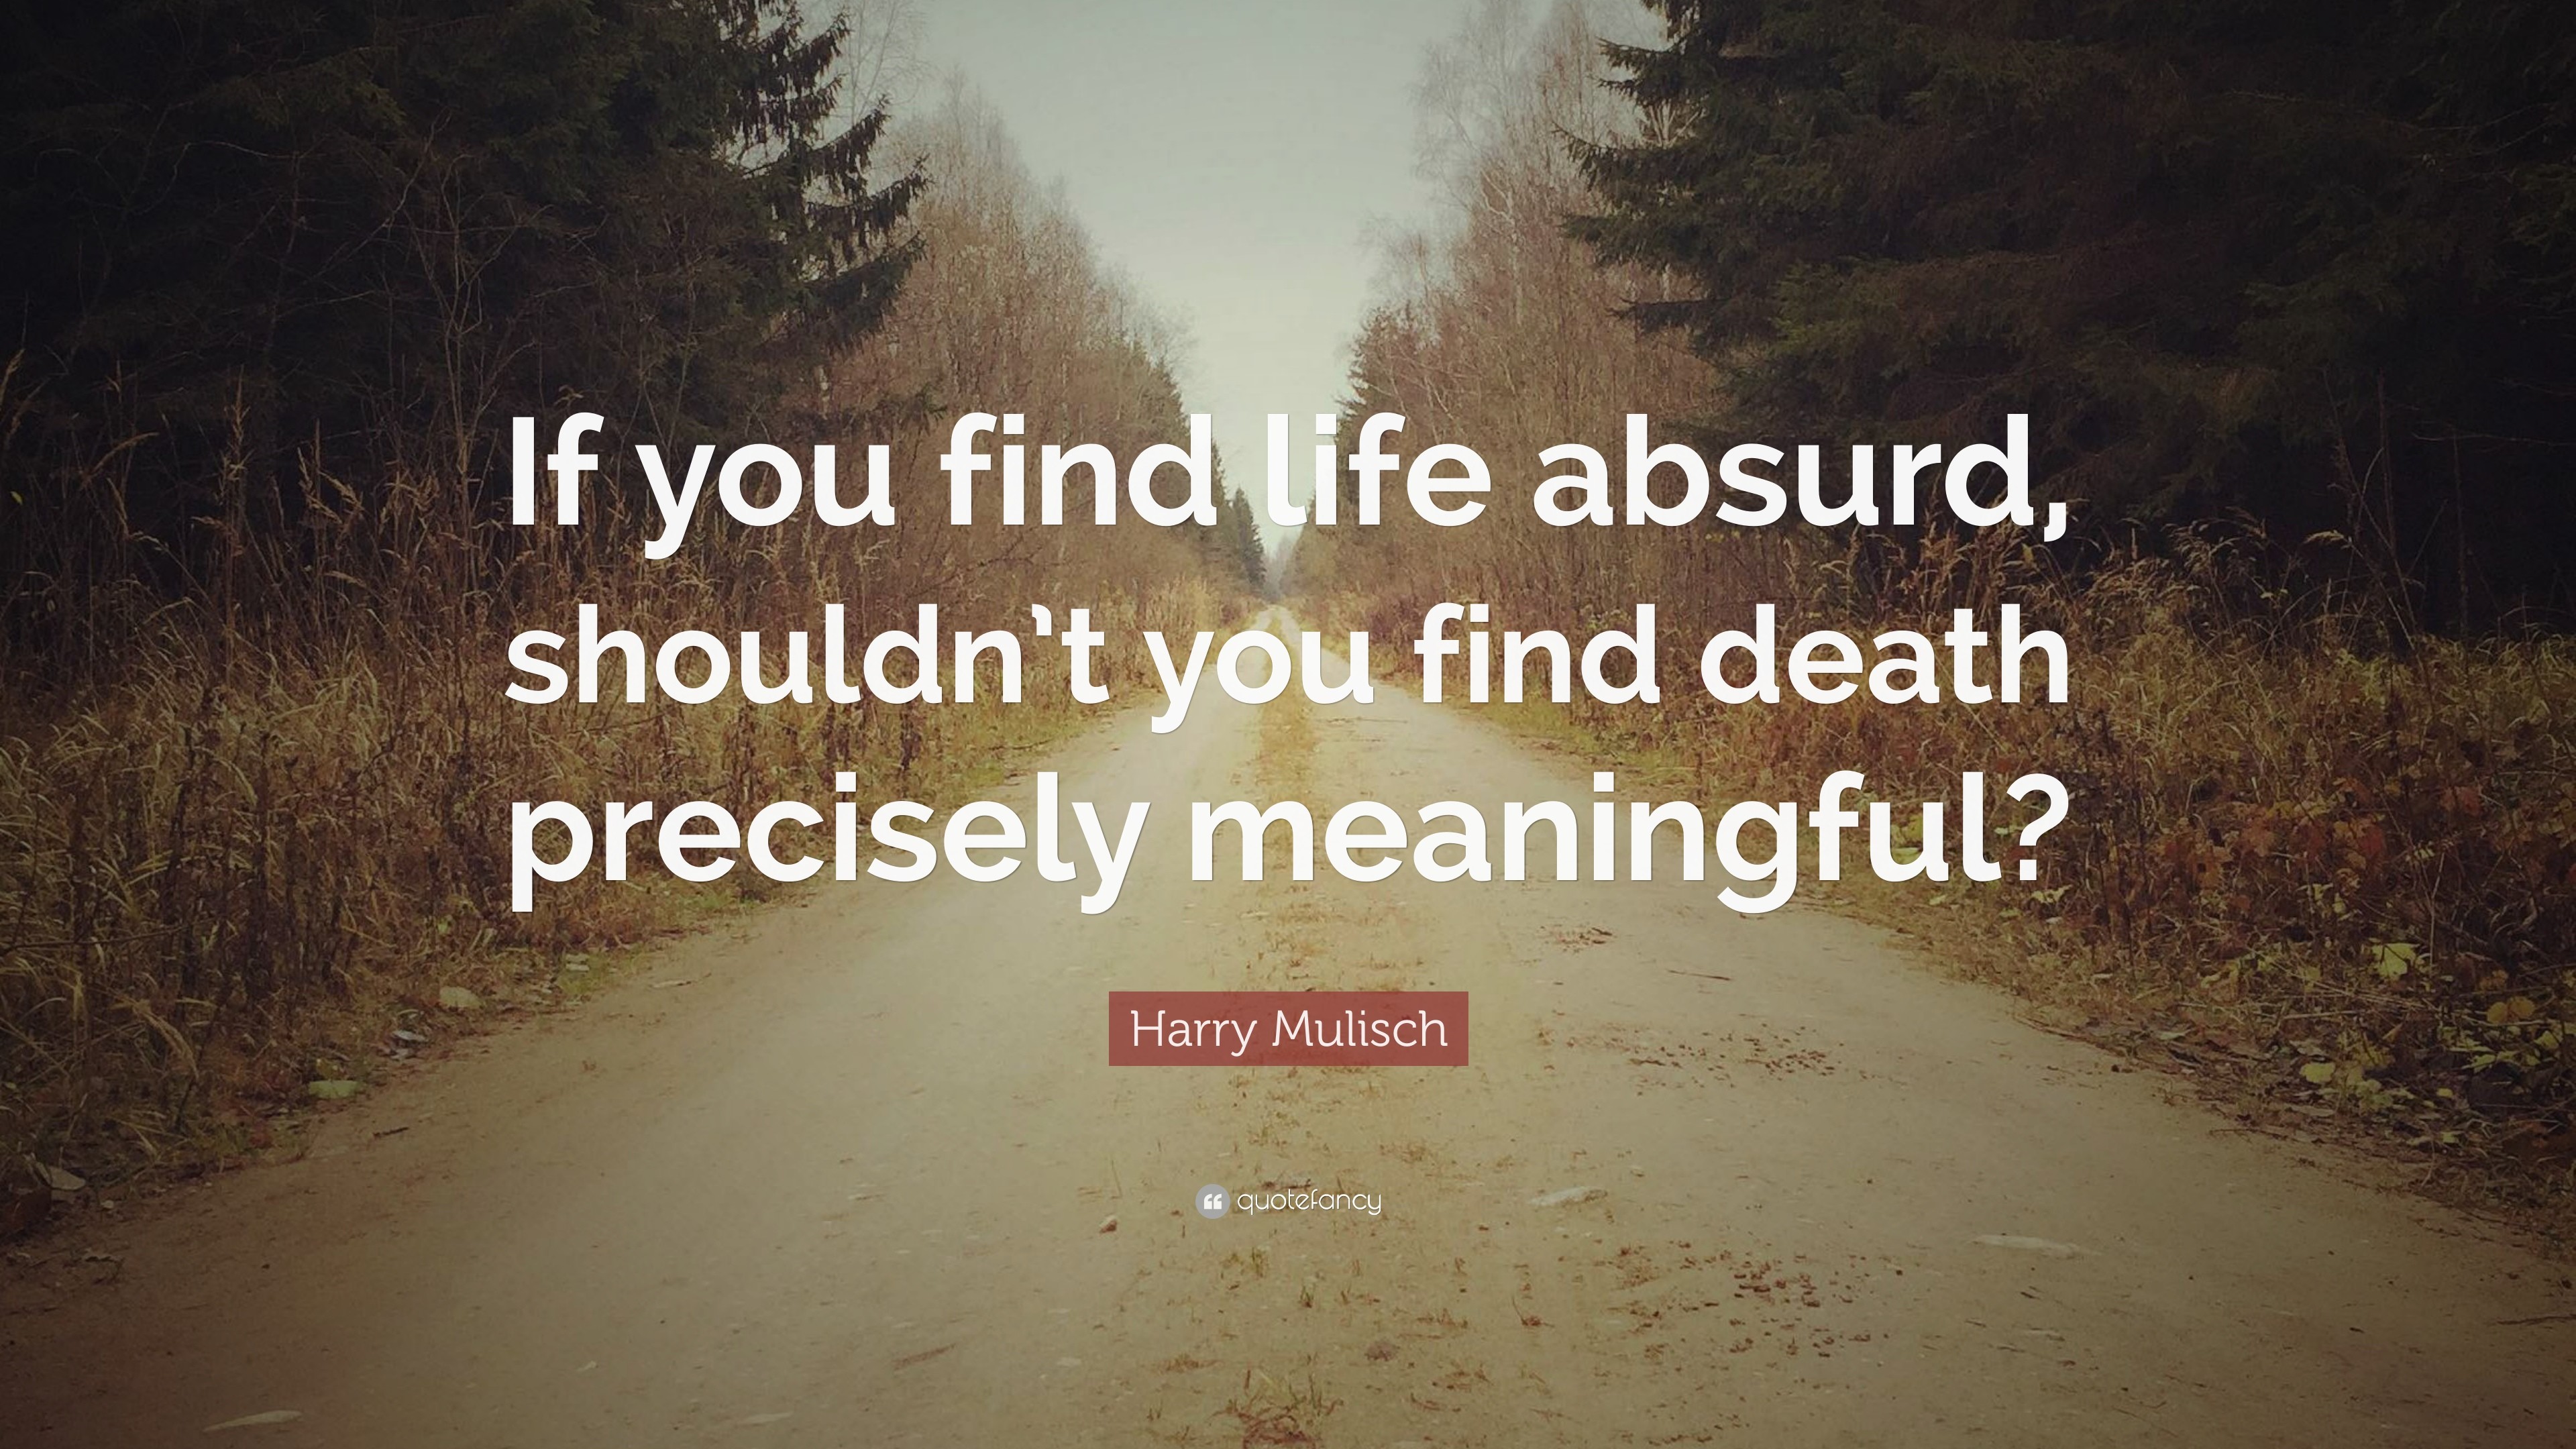 3840x2160 Harry Mulisch Quote: “If you find life absurd, shouldn't you find